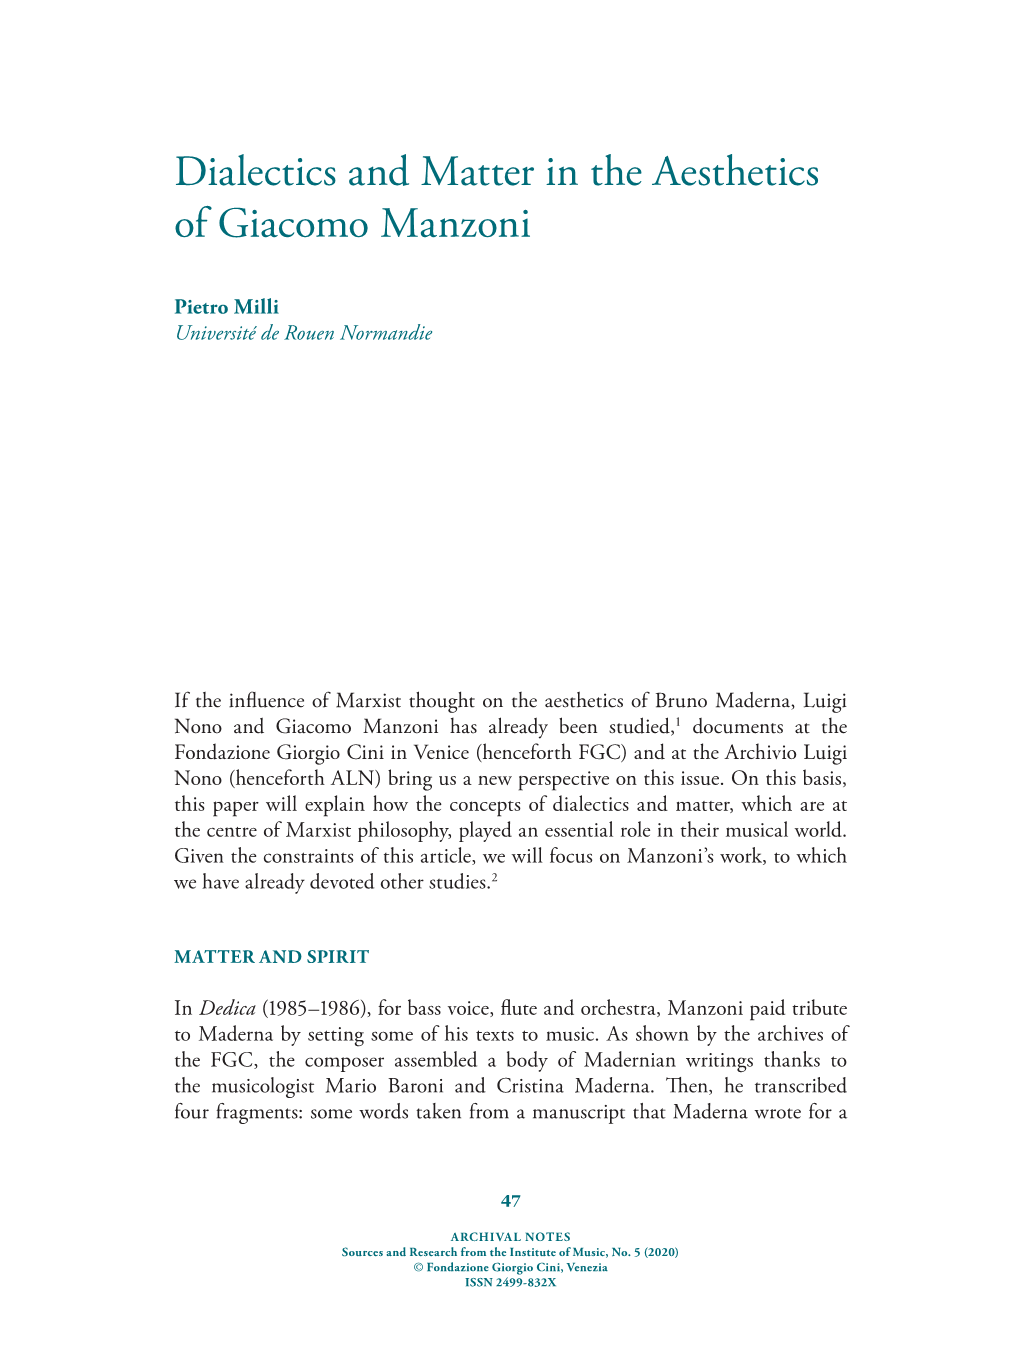 Dialectics and Matter in the Aesthetics of Giacomo Manzoni